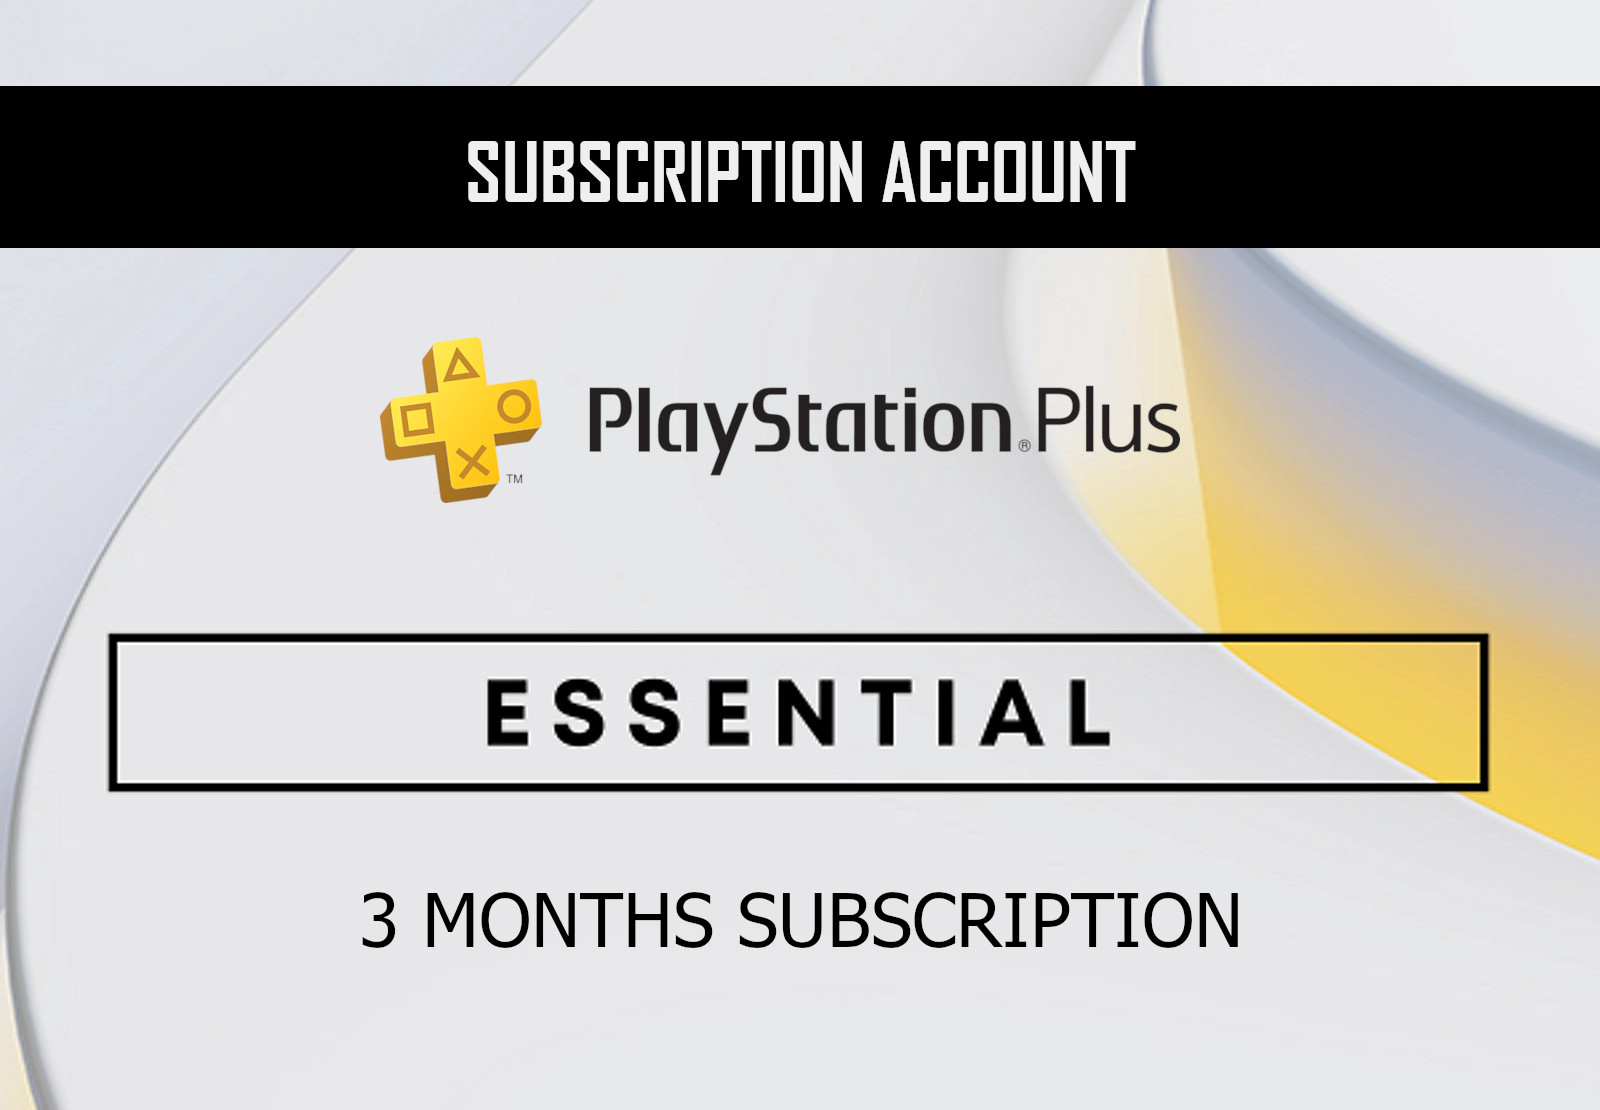 PlayStation Plus Essential 3 Months Subscription ACCOUNT